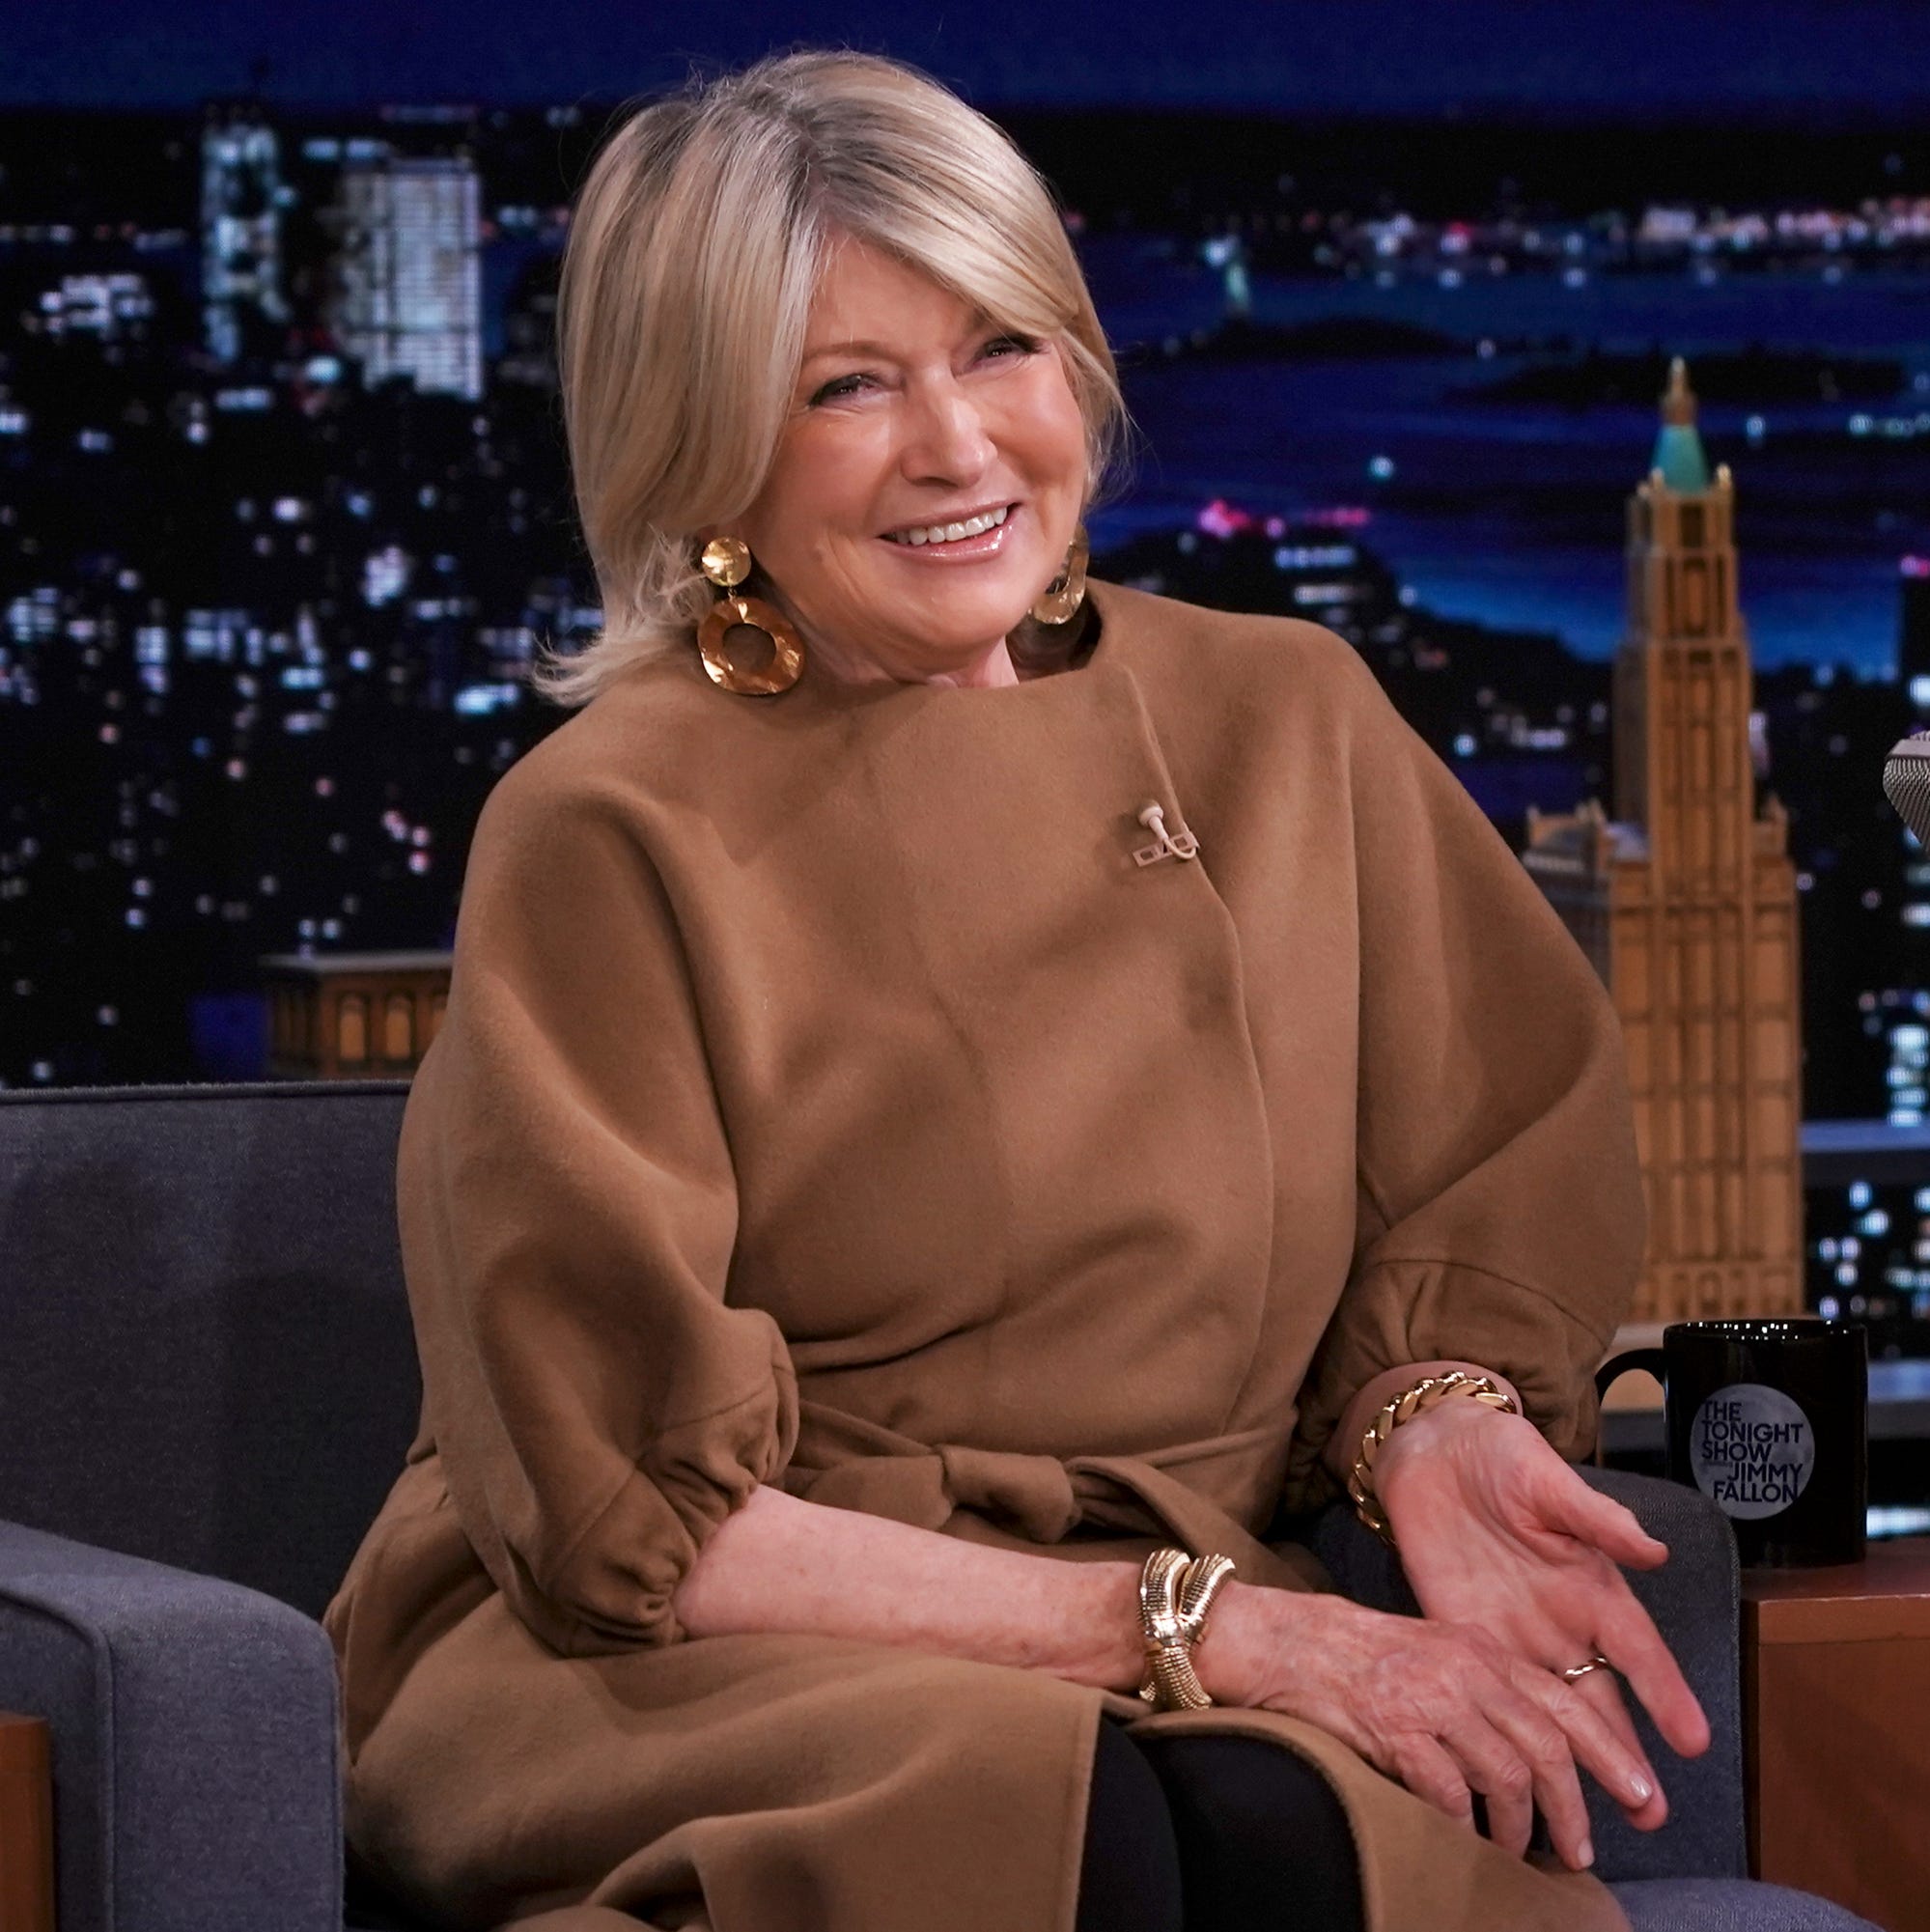 Martha Stewart Just Revealed She's Going to Break a Guinness World Record